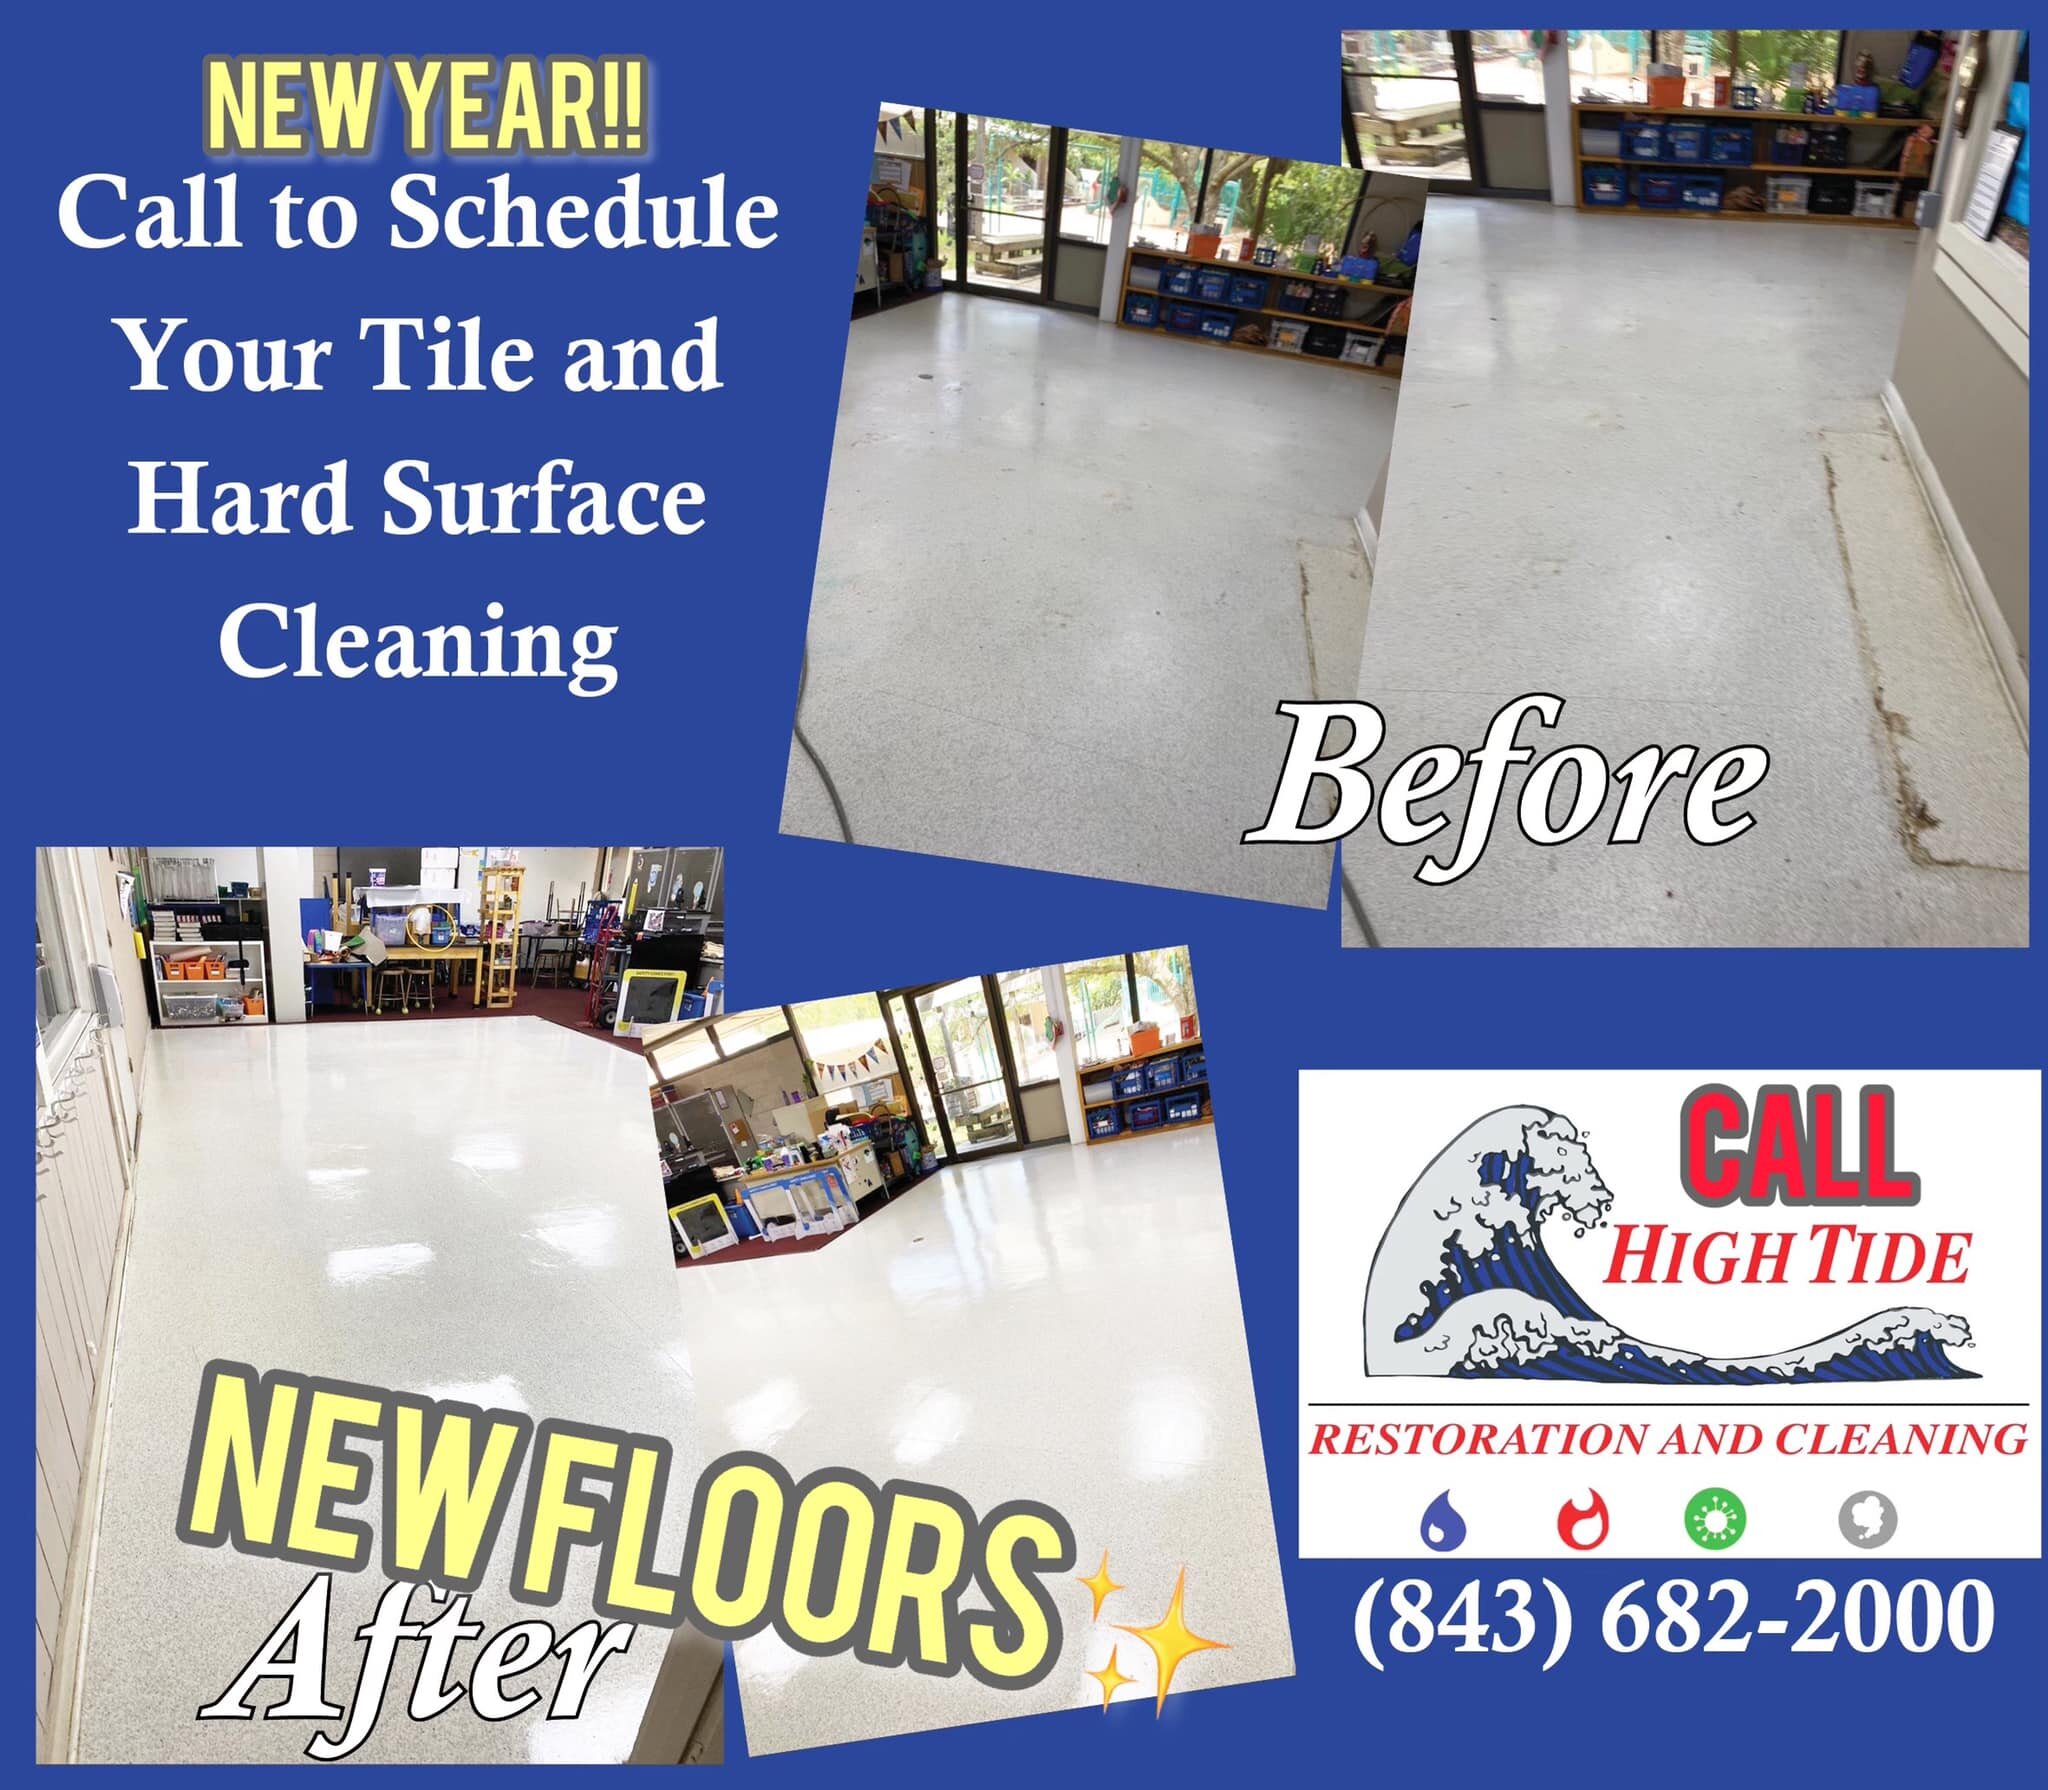 New Year&hellip;New Floors! Call us, and we can help freshen up your floors✨✨